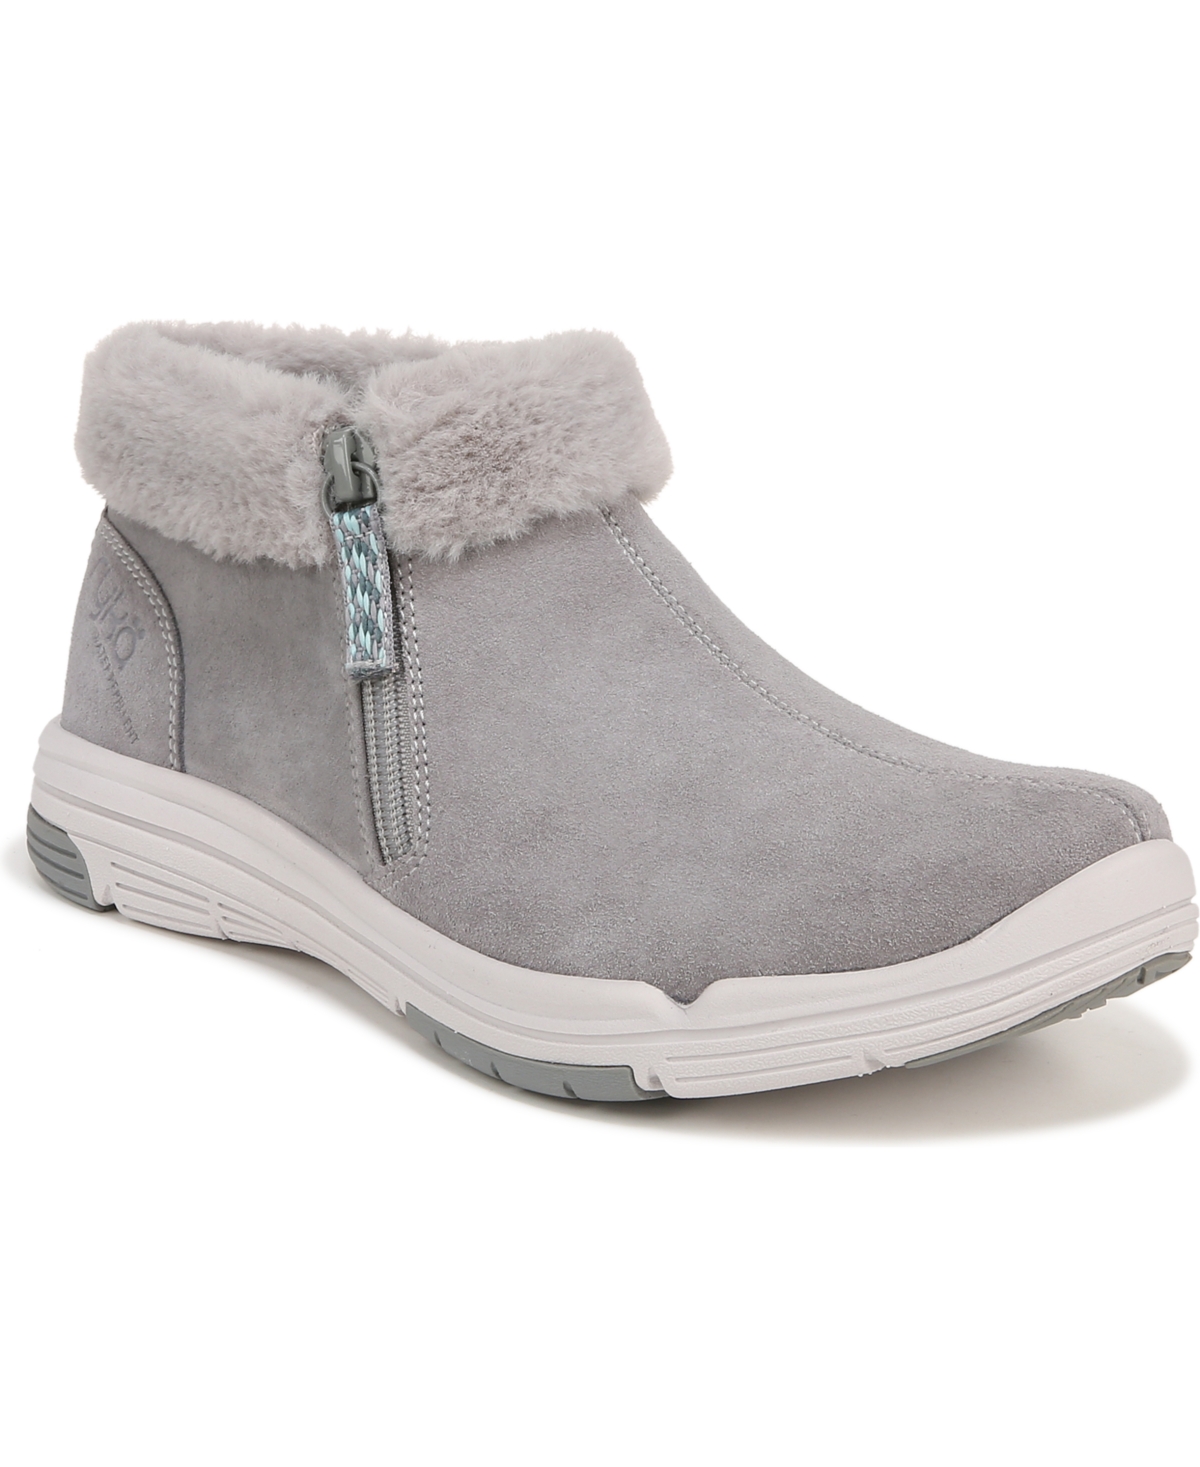 Women's Anchorge Mid Booties - Grey Suede